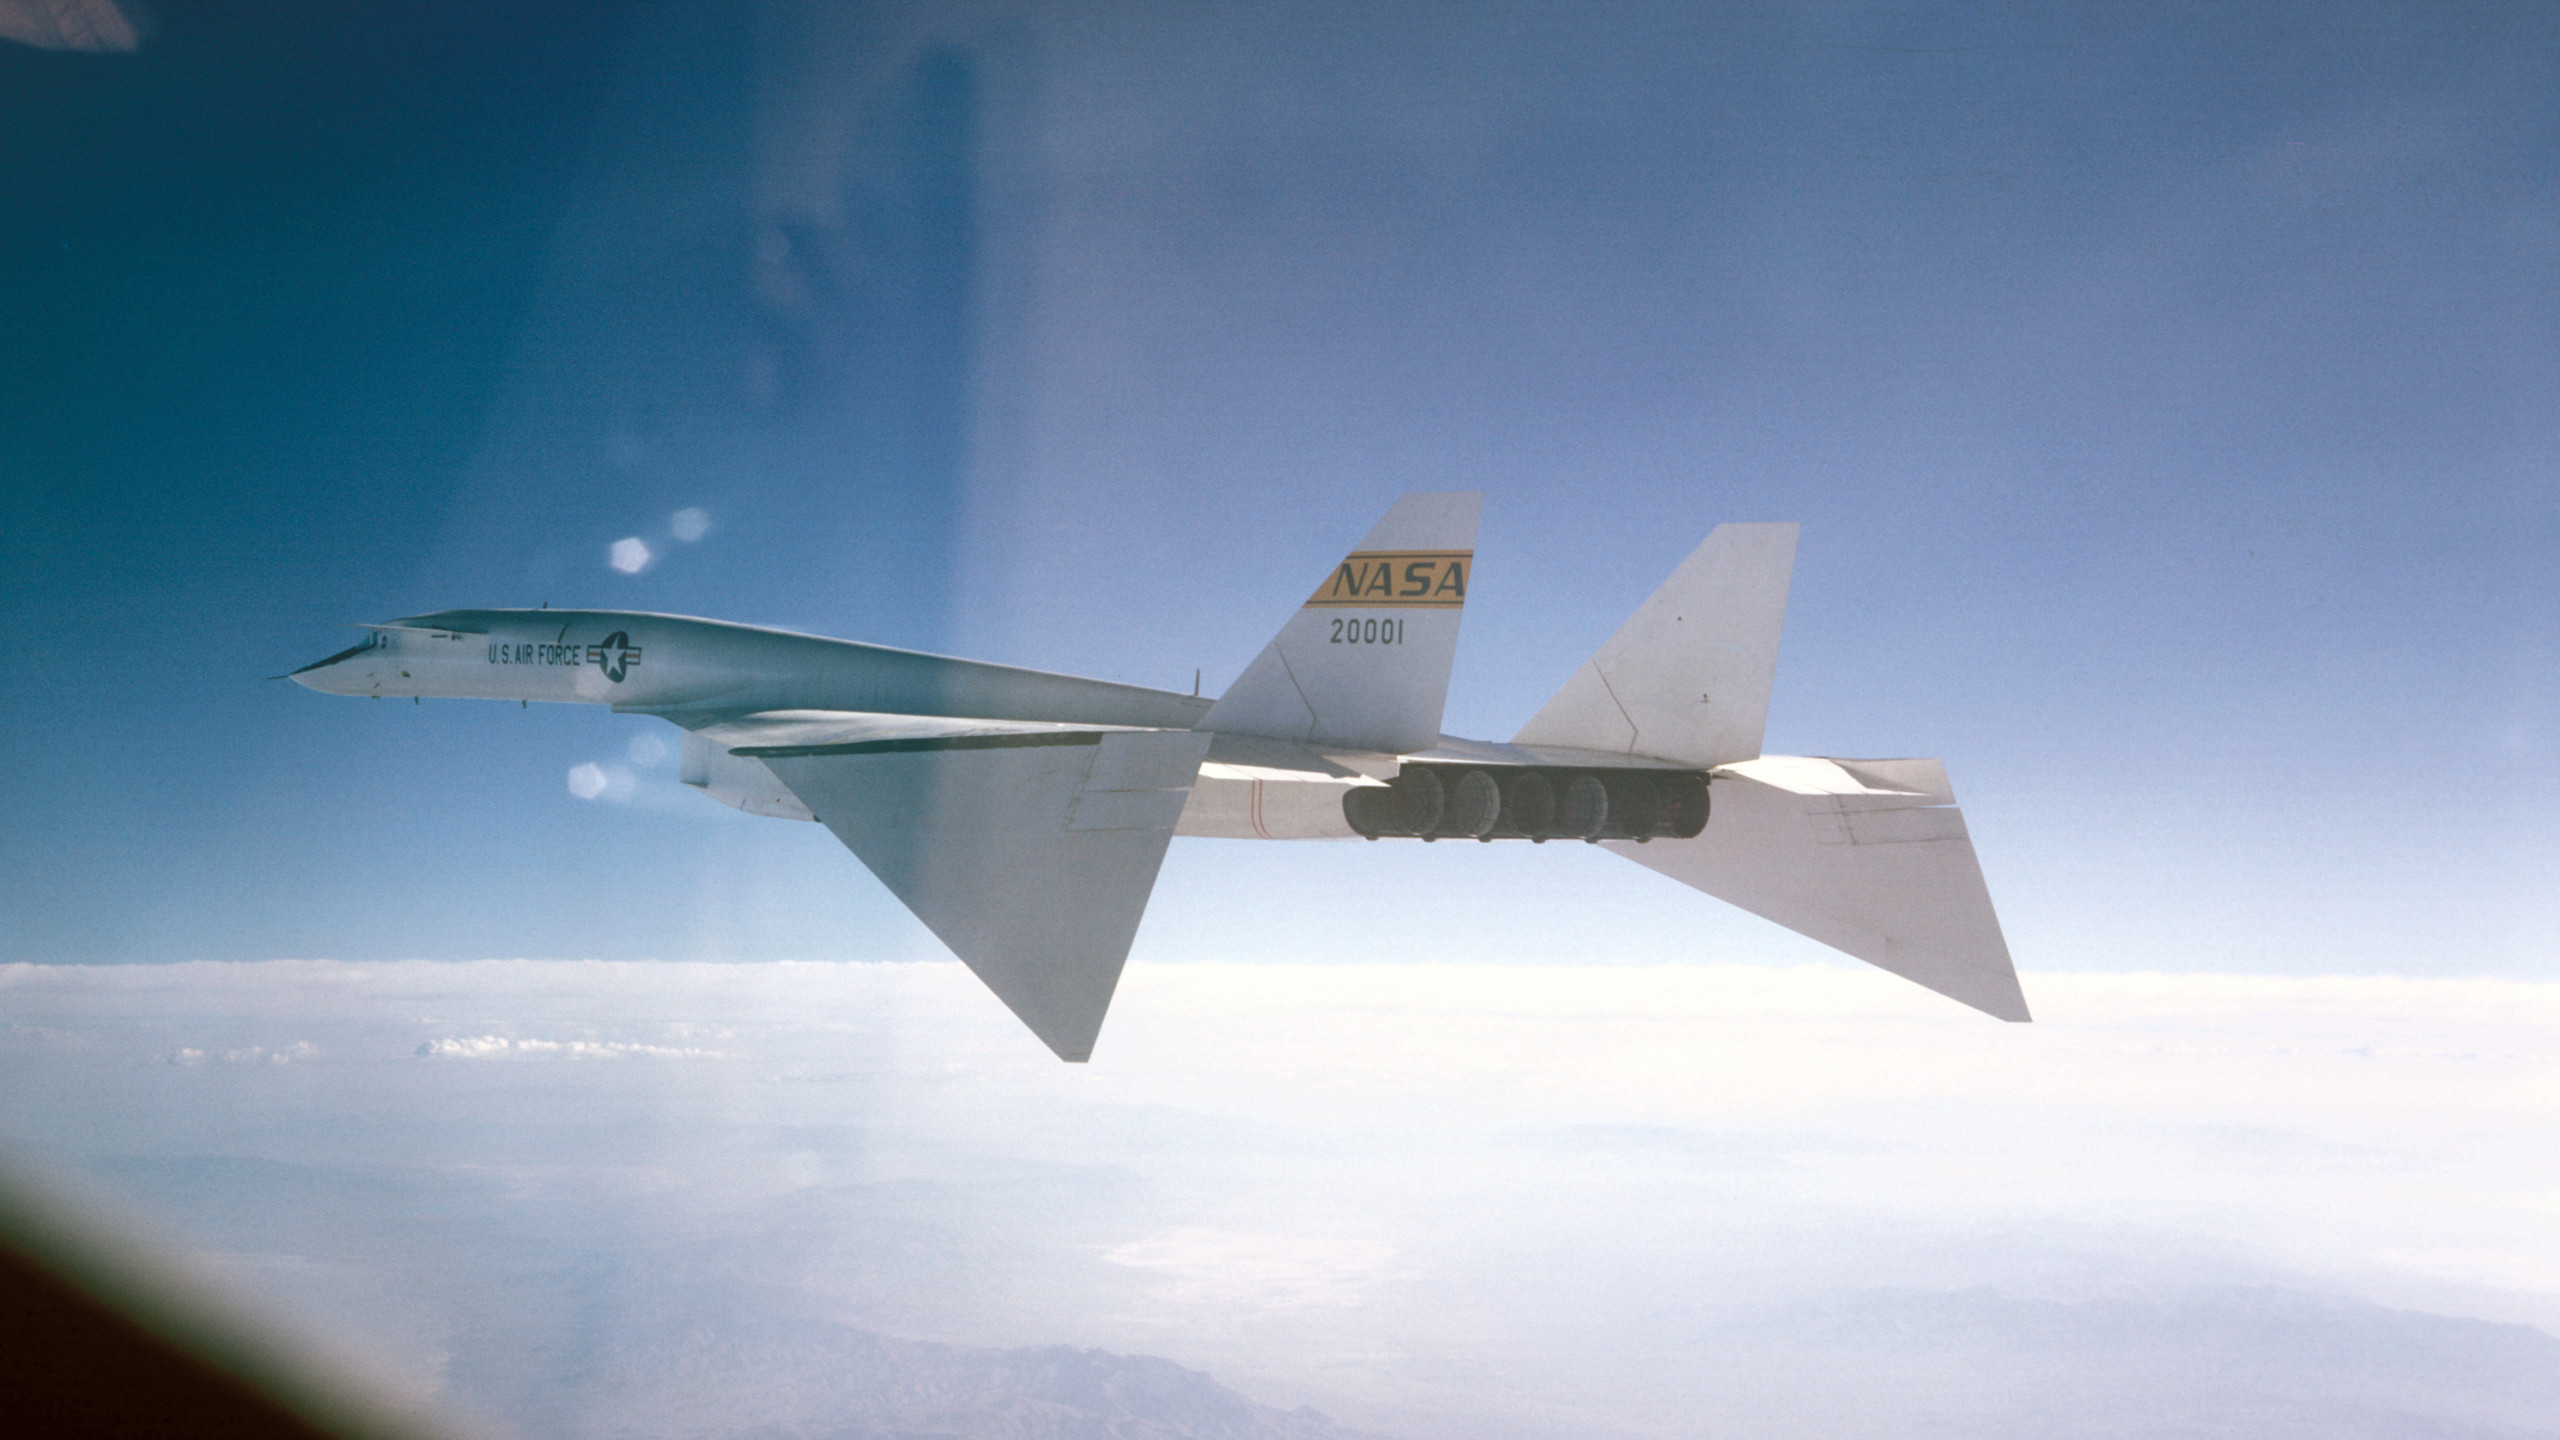 Wallpaper North American XB-70 Valkyrie, fighter aircraft, U.S. Air Force, Military #122472560 x 1440